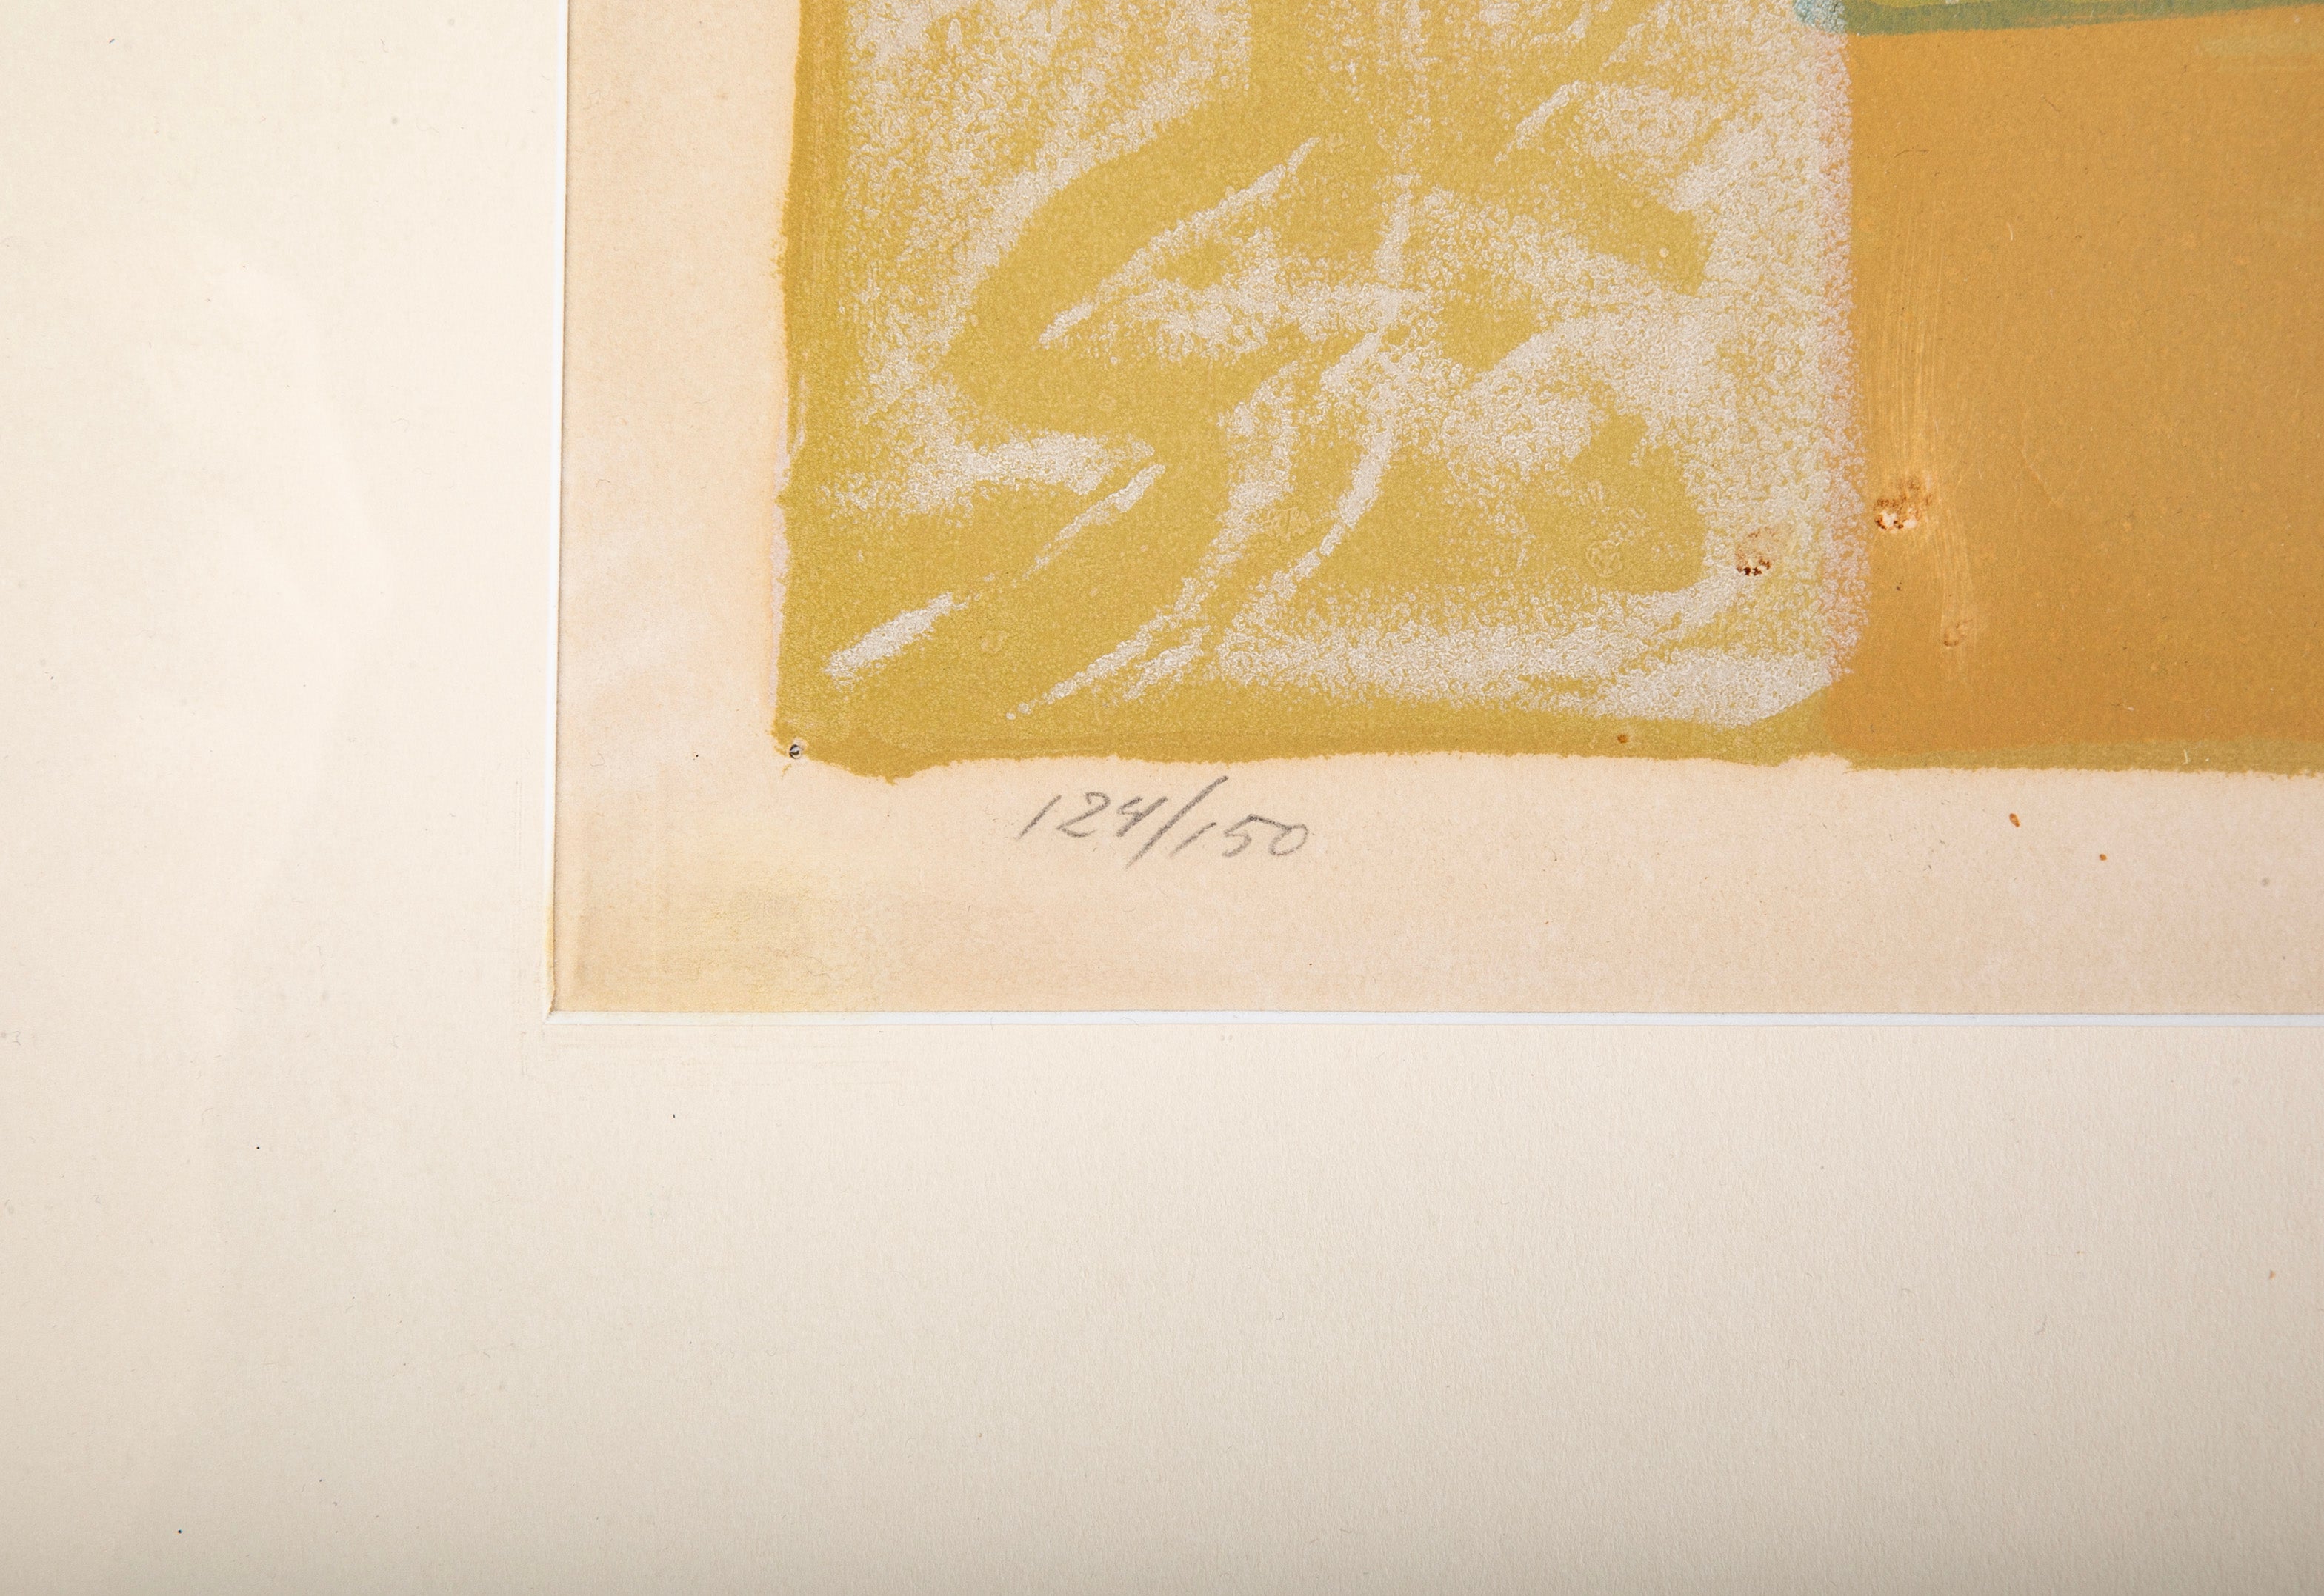 20th Century Lithograph by Serge Poliakoff